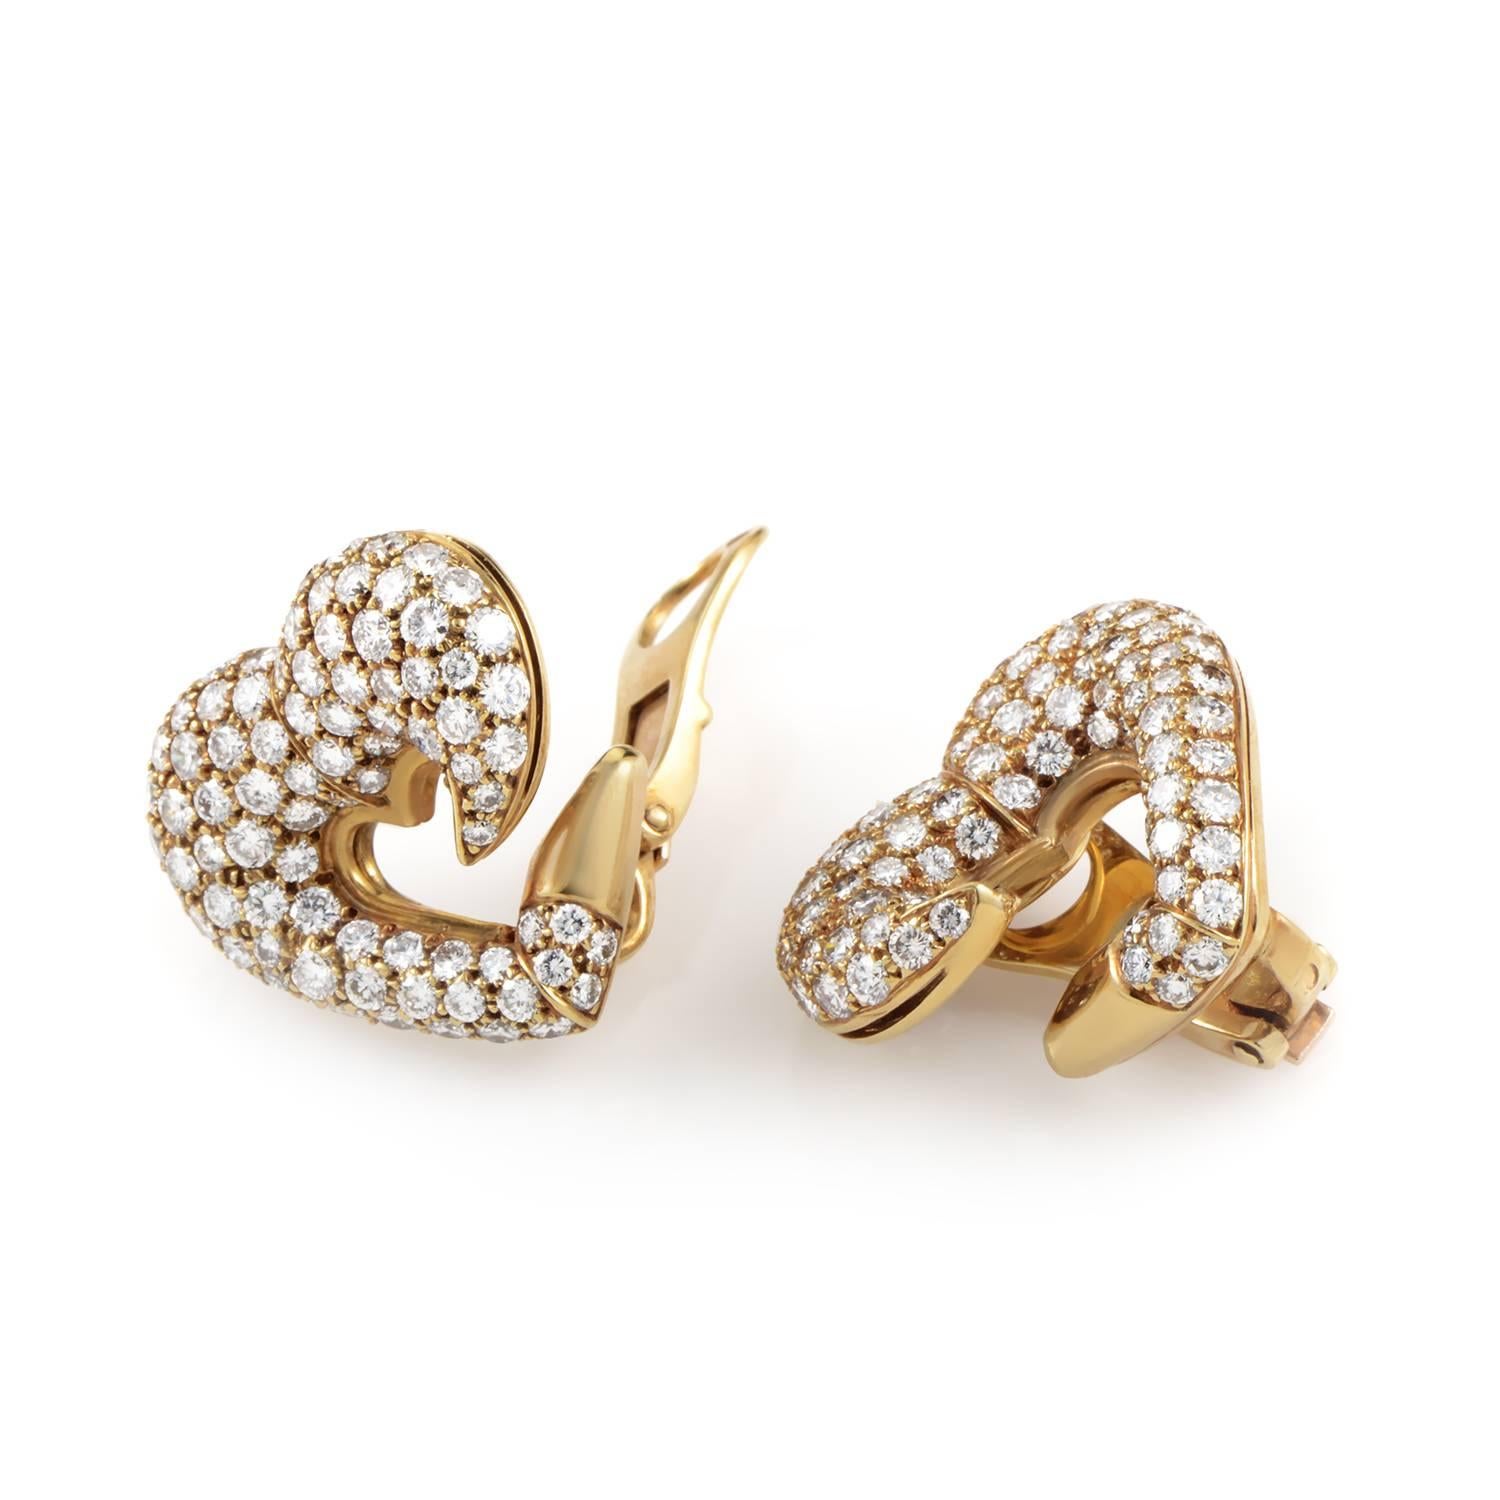 The romantic motif of a heart is complemented brilliantly in these lovely earrings from Bulgari by the dazzling combination of radiant 18K yellow gold and lustrous diamonds weighing in total approximately 5.75 carats for a fascinating